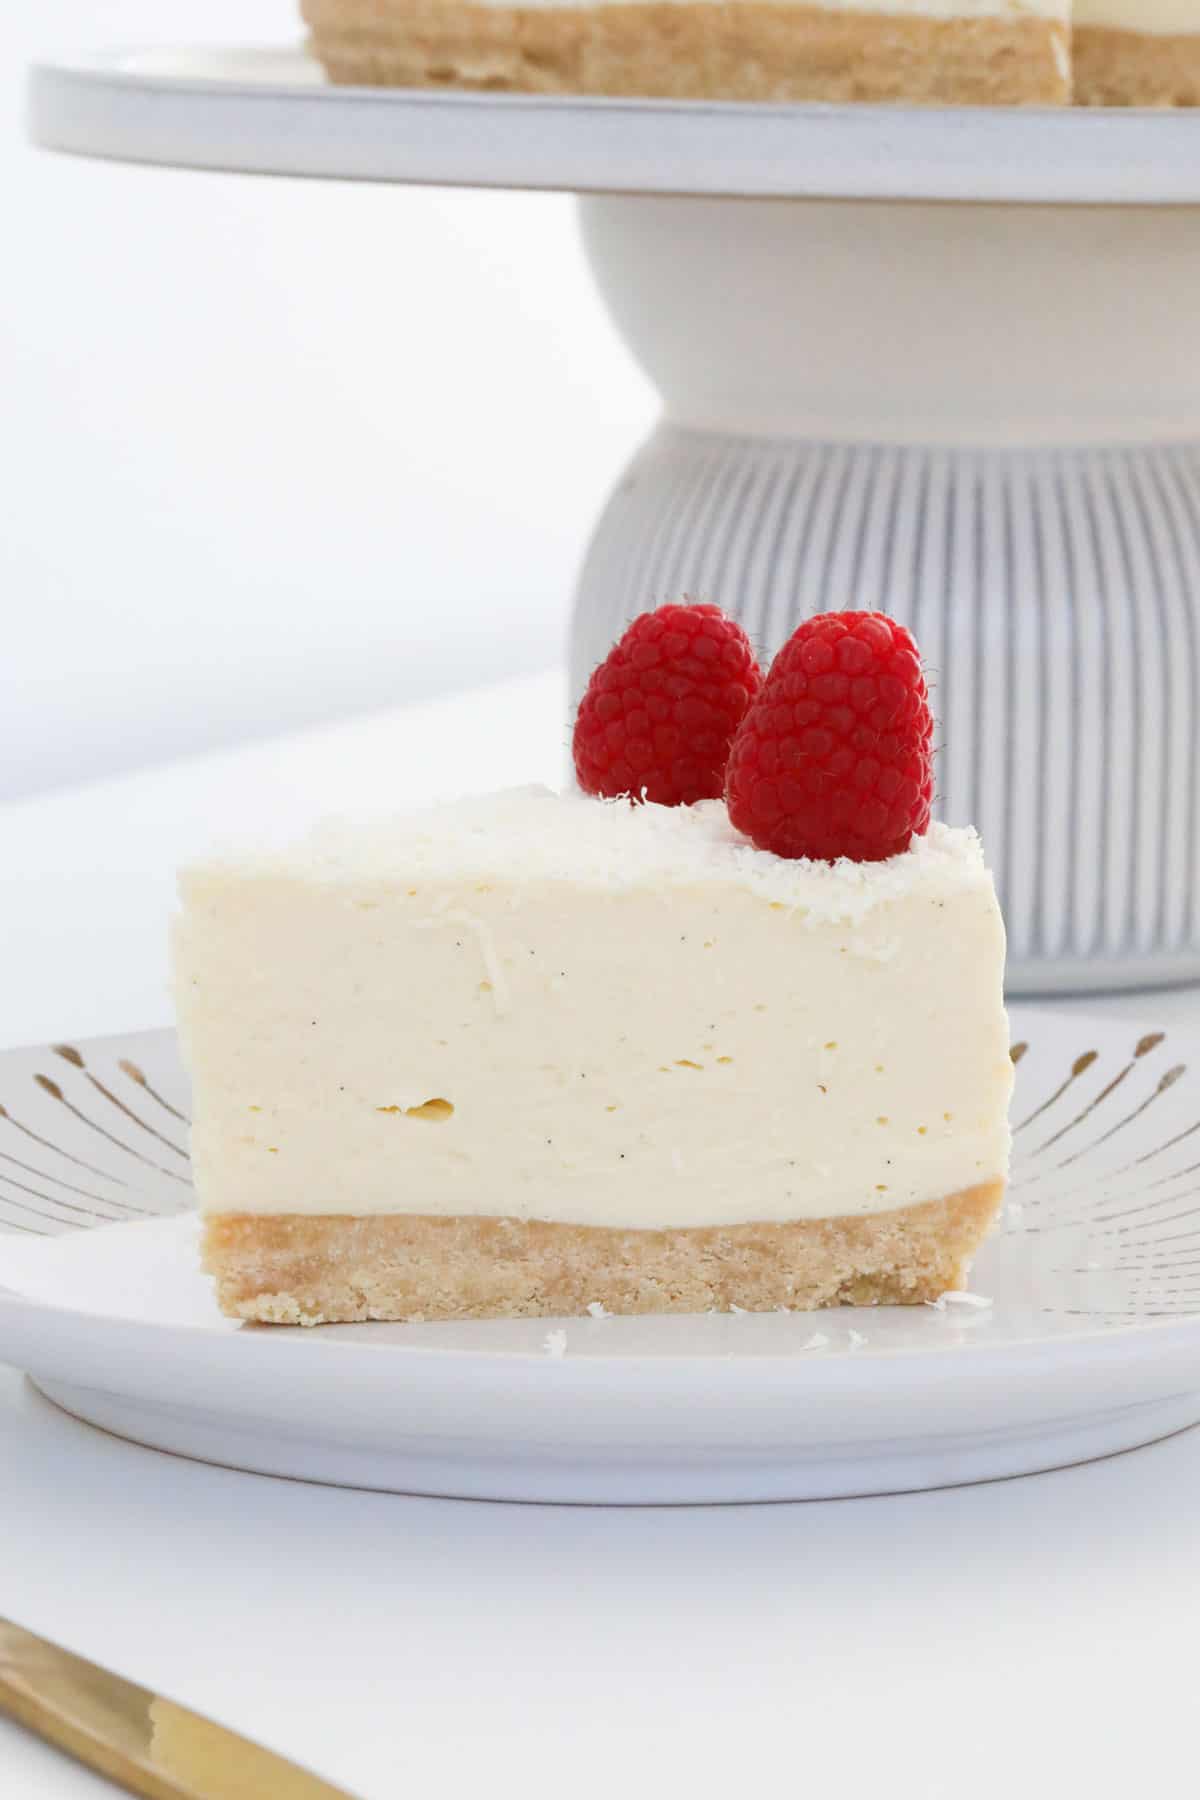 A side view of a piece of cheesecake on a white plate, topped with fresh berries.